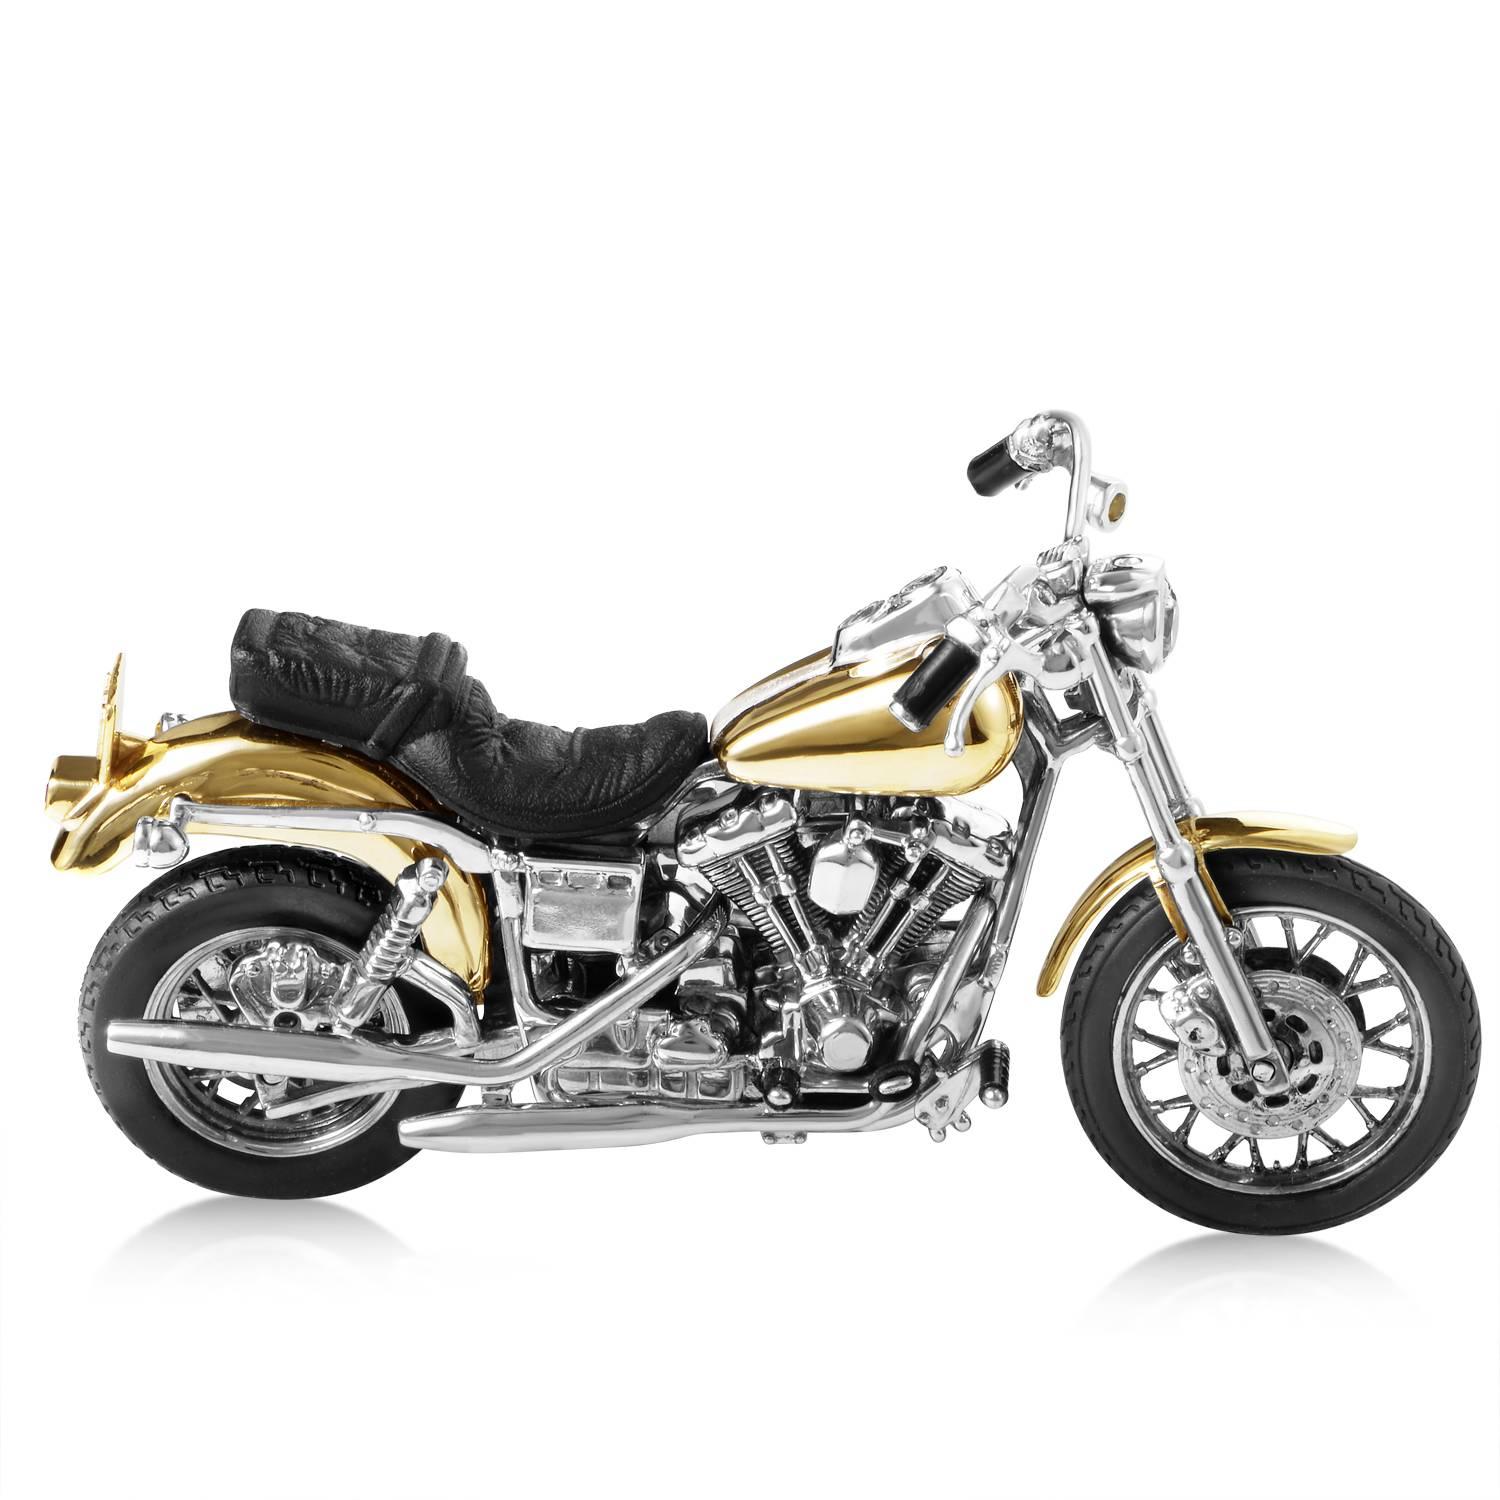 Built with luxury parts only! A magnificent design built on a classic, this reproduction of the Harley Davidson Dyna Low Rider lures the eye into its fine details. 14K yellow gold and sterling silver are the primary roar behind this one-of-a-kind